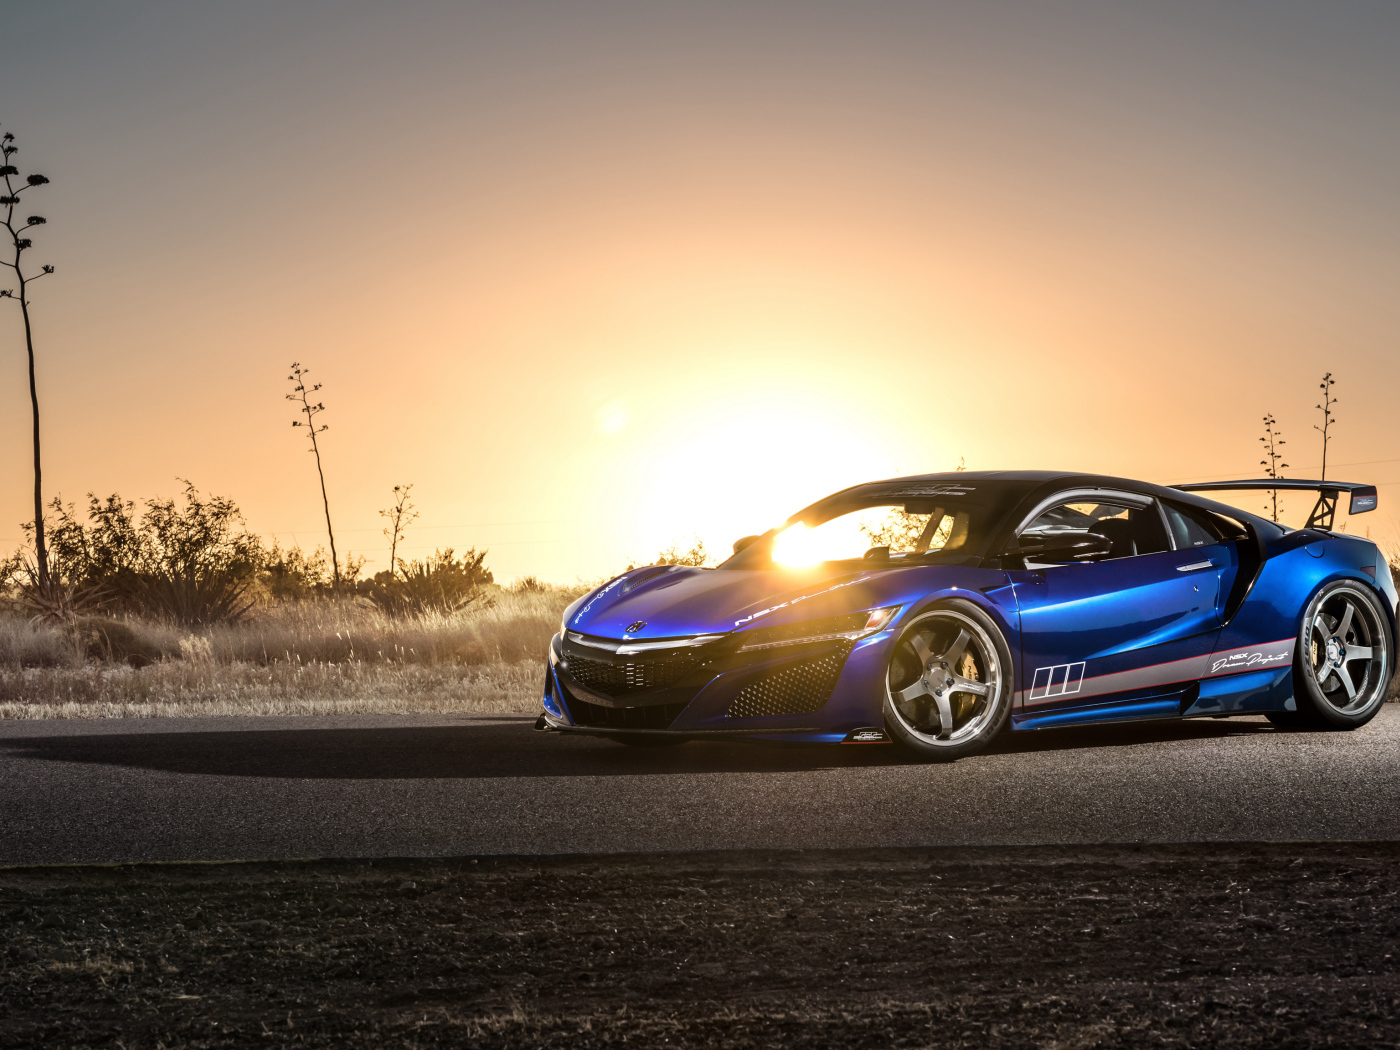 Blue sports car Acura NSX, 2017 in the background of a bright sun